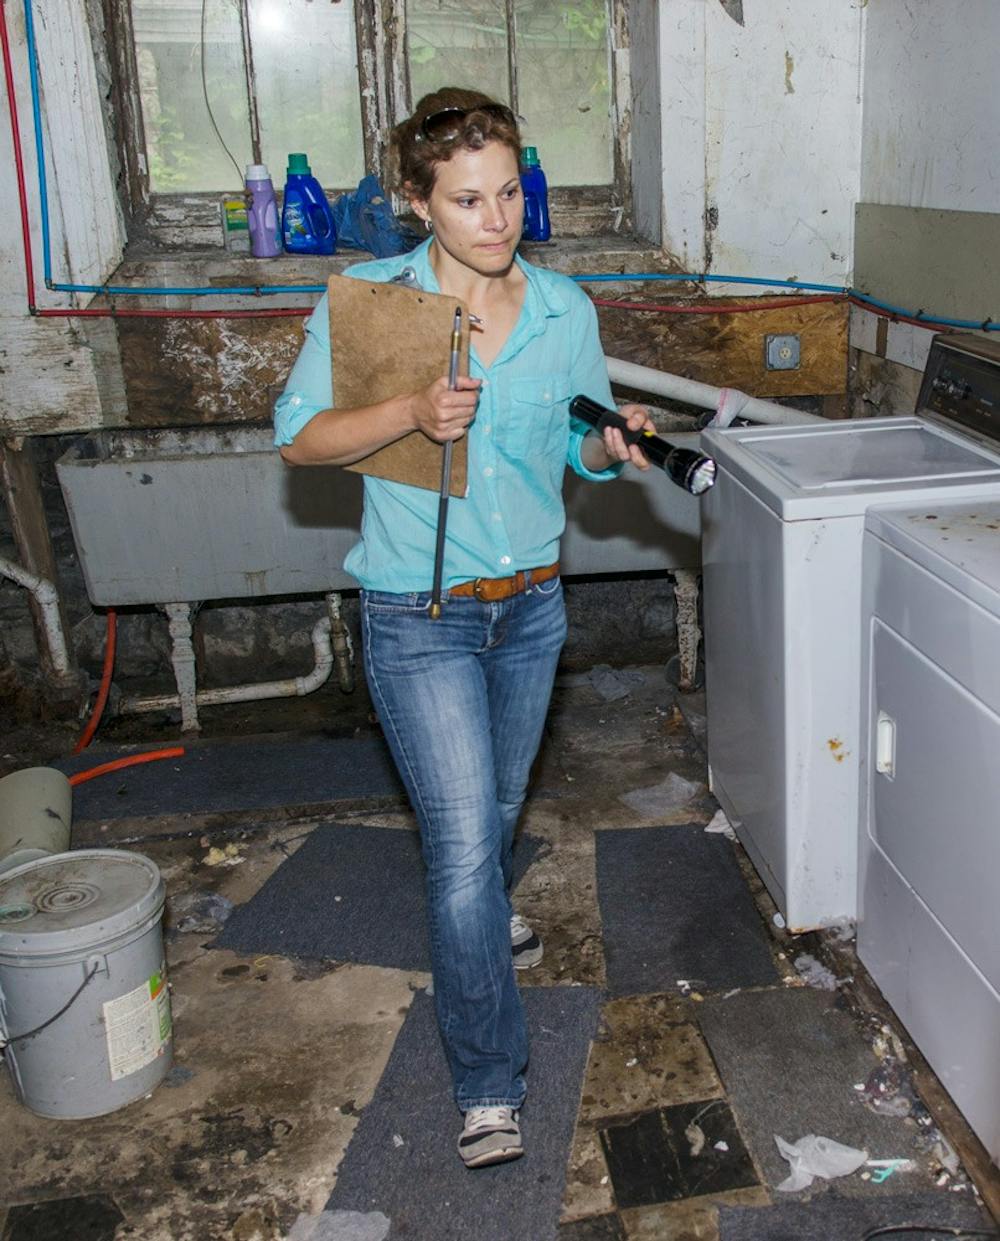 <p>Buffalo housing inspector Cathy Amdur walks through a Northrup Place basement. Buffalo city inspectors and Daniel Ryan, director of Off Campus Student Services, conducted housing blitzes in the University Heights on Saturday, inspecting roughly 35 homes on Winspear Avenue and Northrup Place.</p>